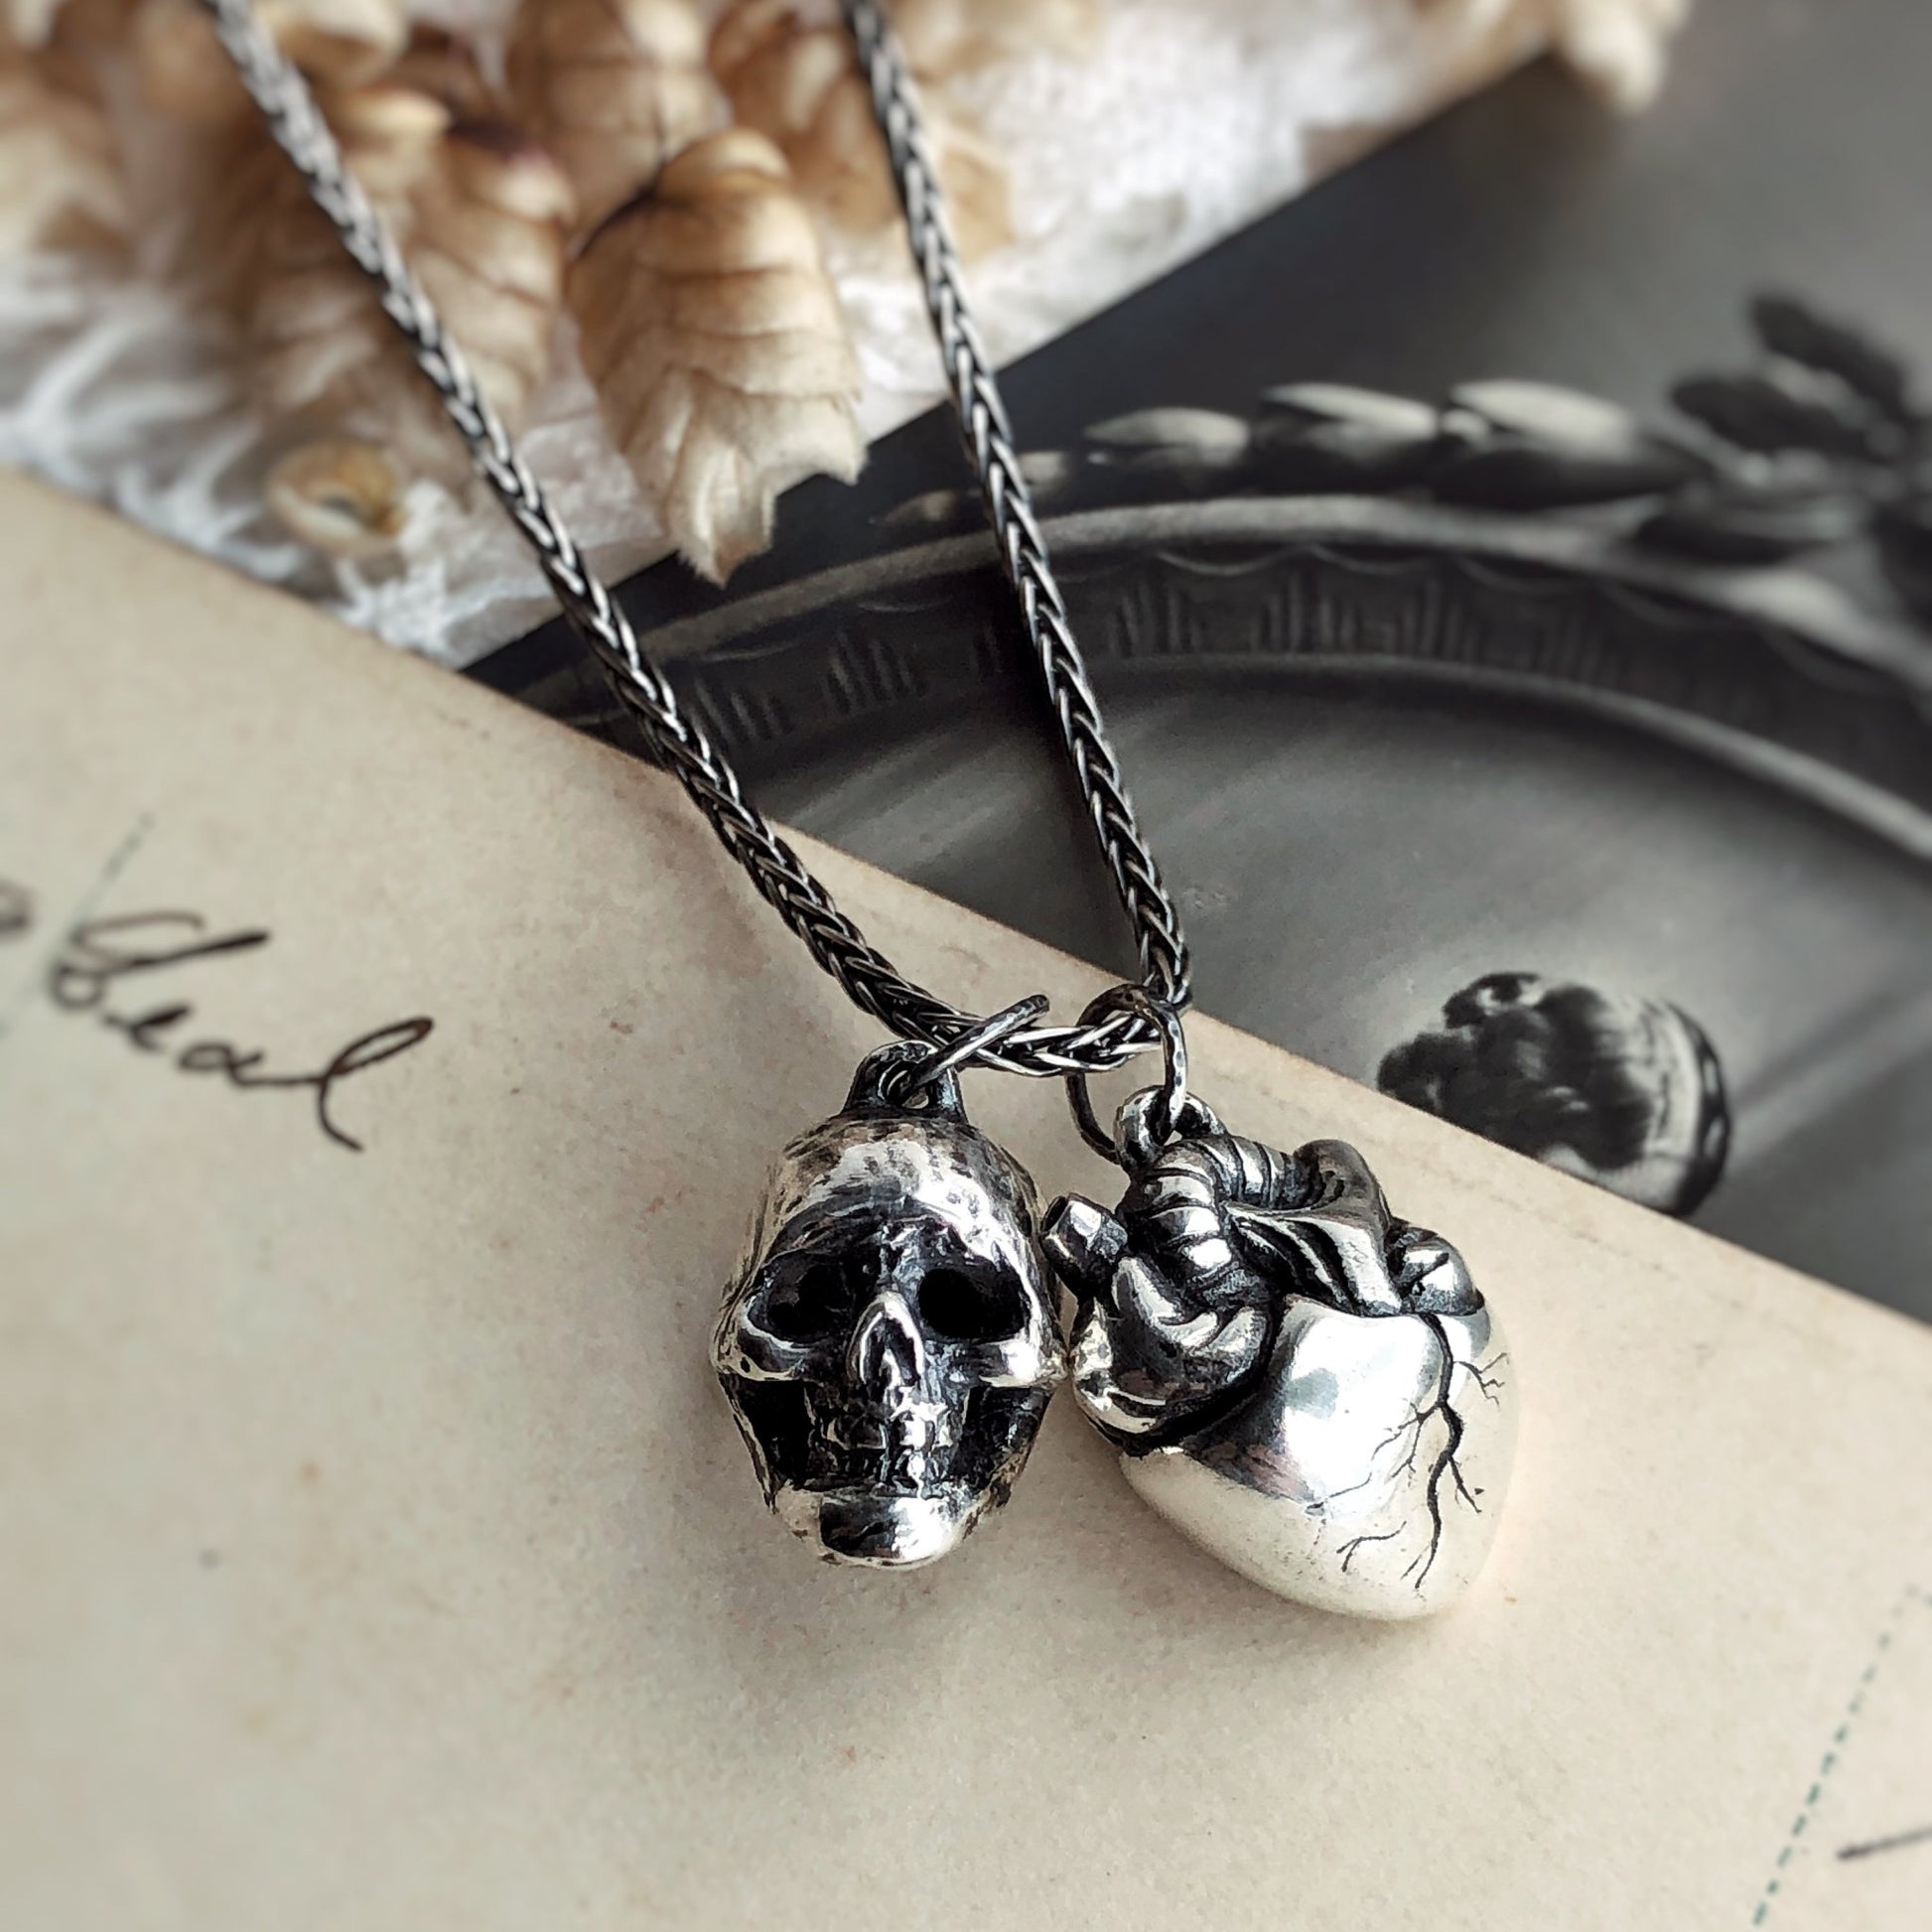 Skull Charm Necklace Sterling Silver Artisan Jewelry Build your necklace Gothic Unisex Layering